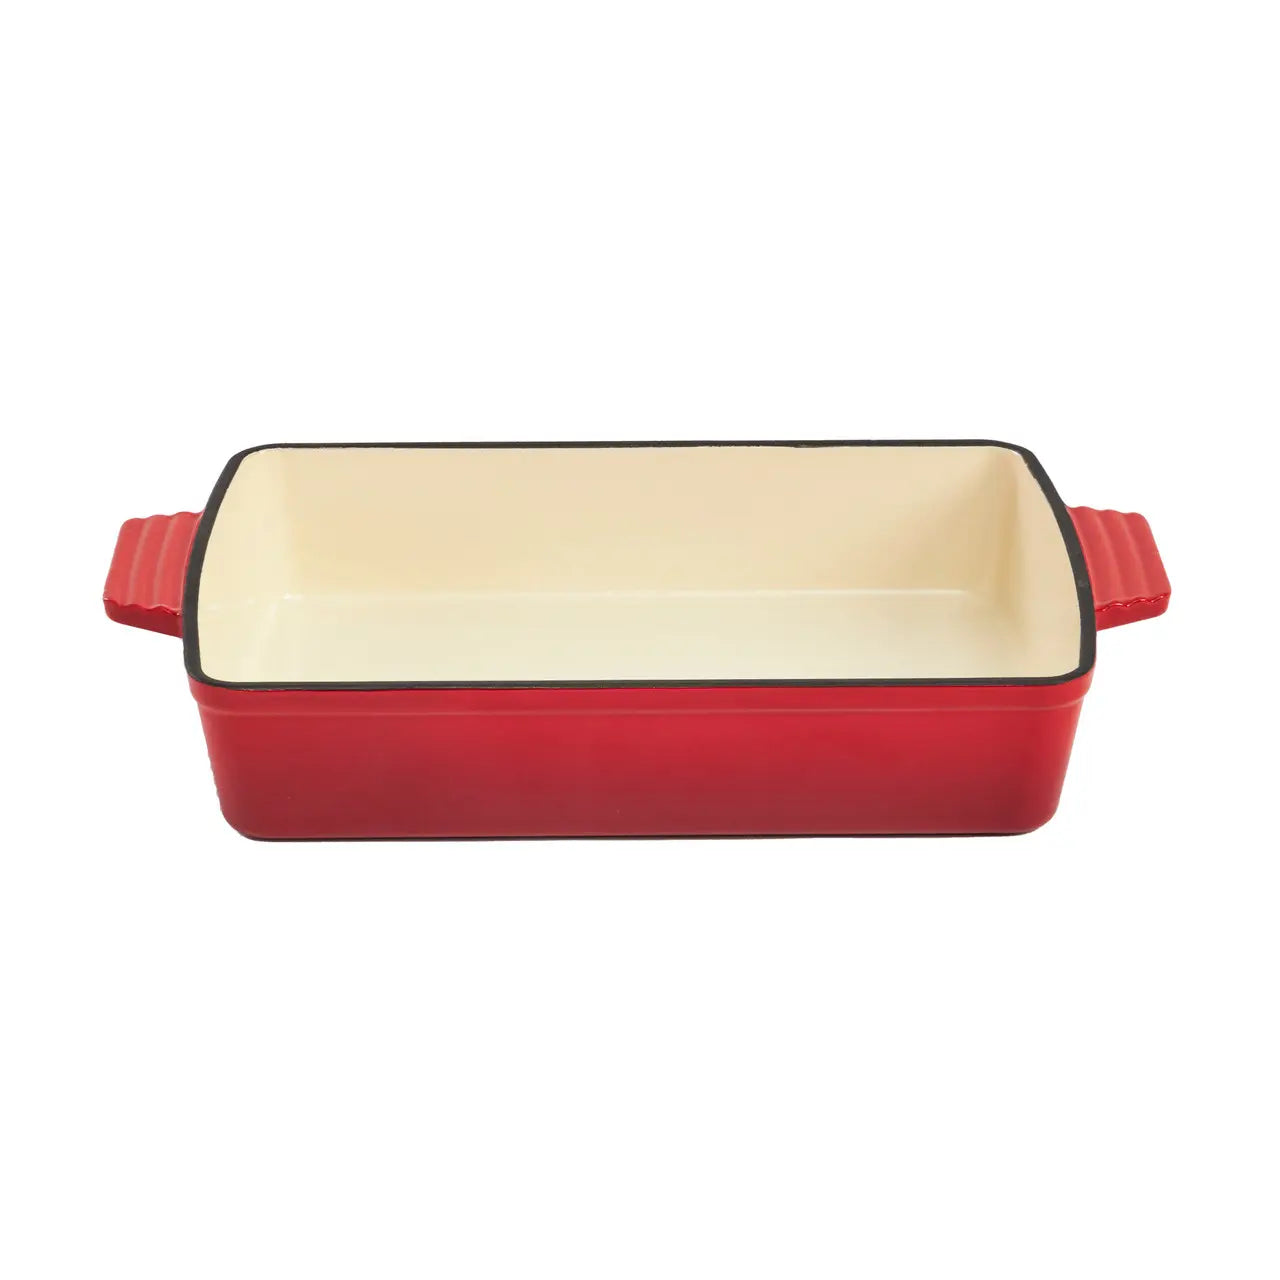 Enameled Cast Iron 13 inch by 9 inch Rectangle Baking Dish in Red